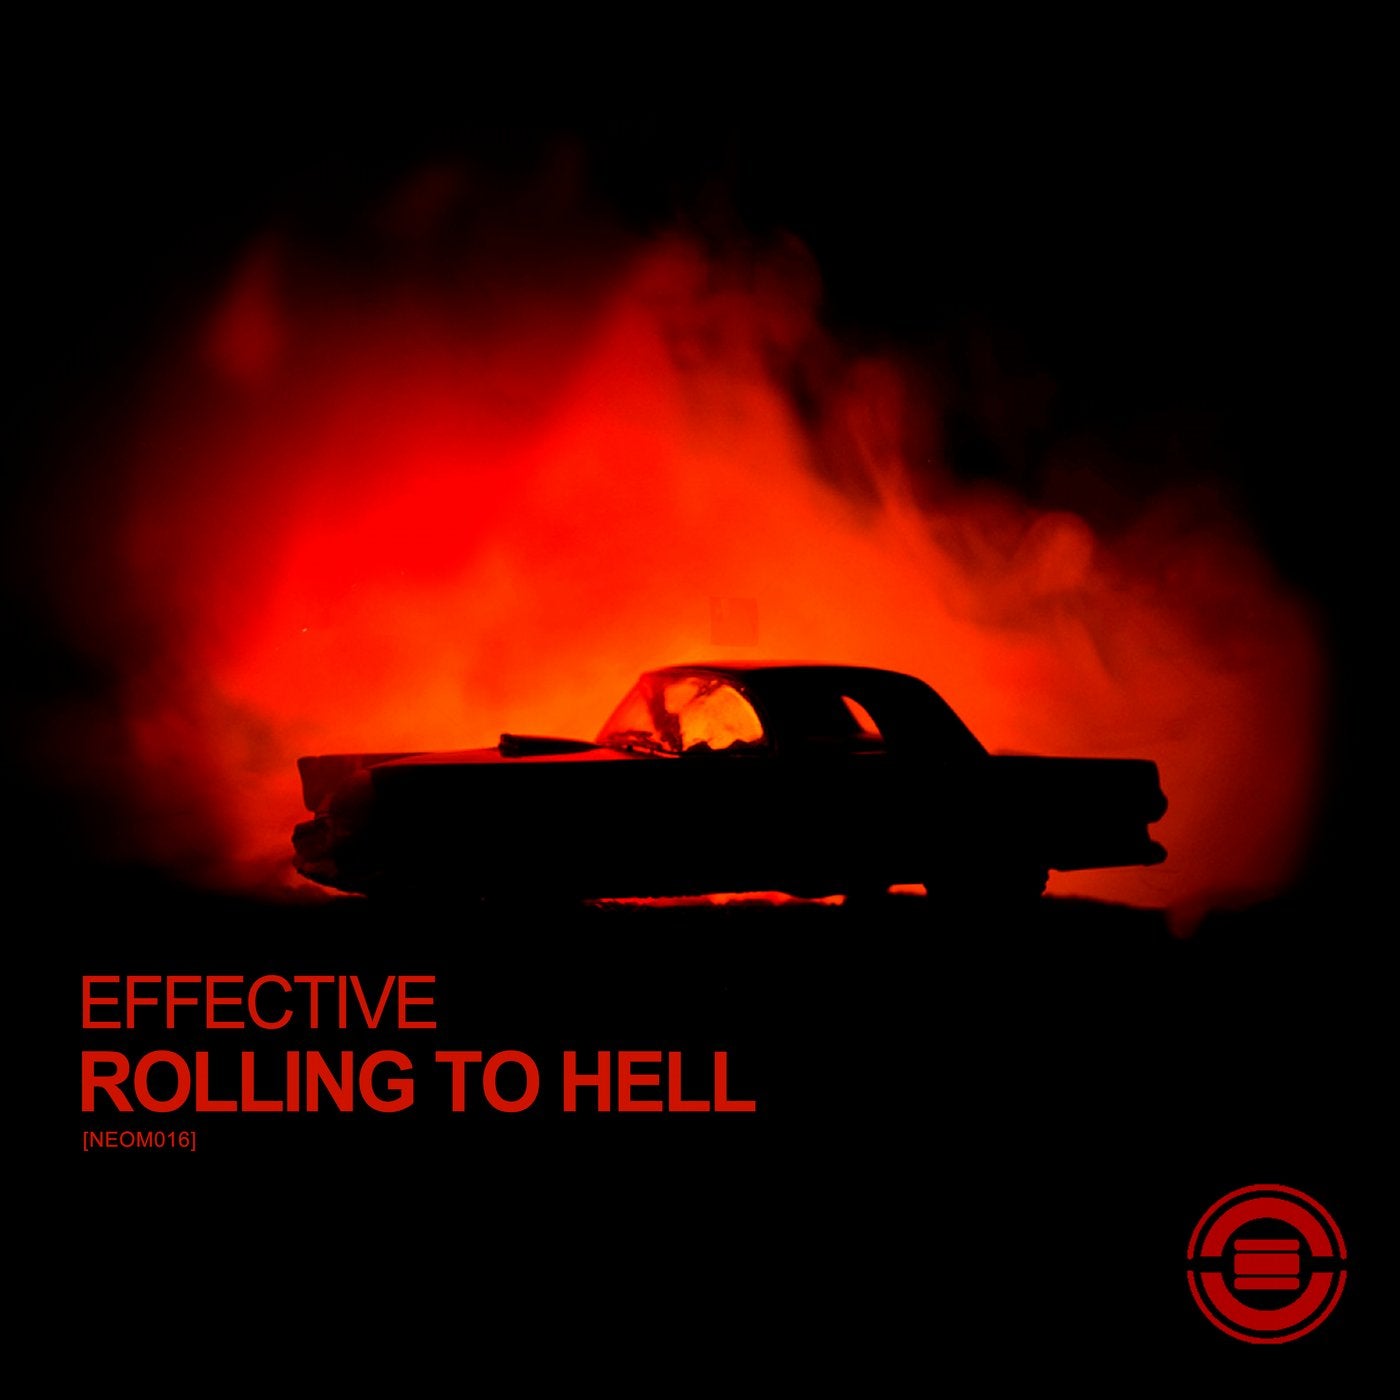 Rolling to Hell